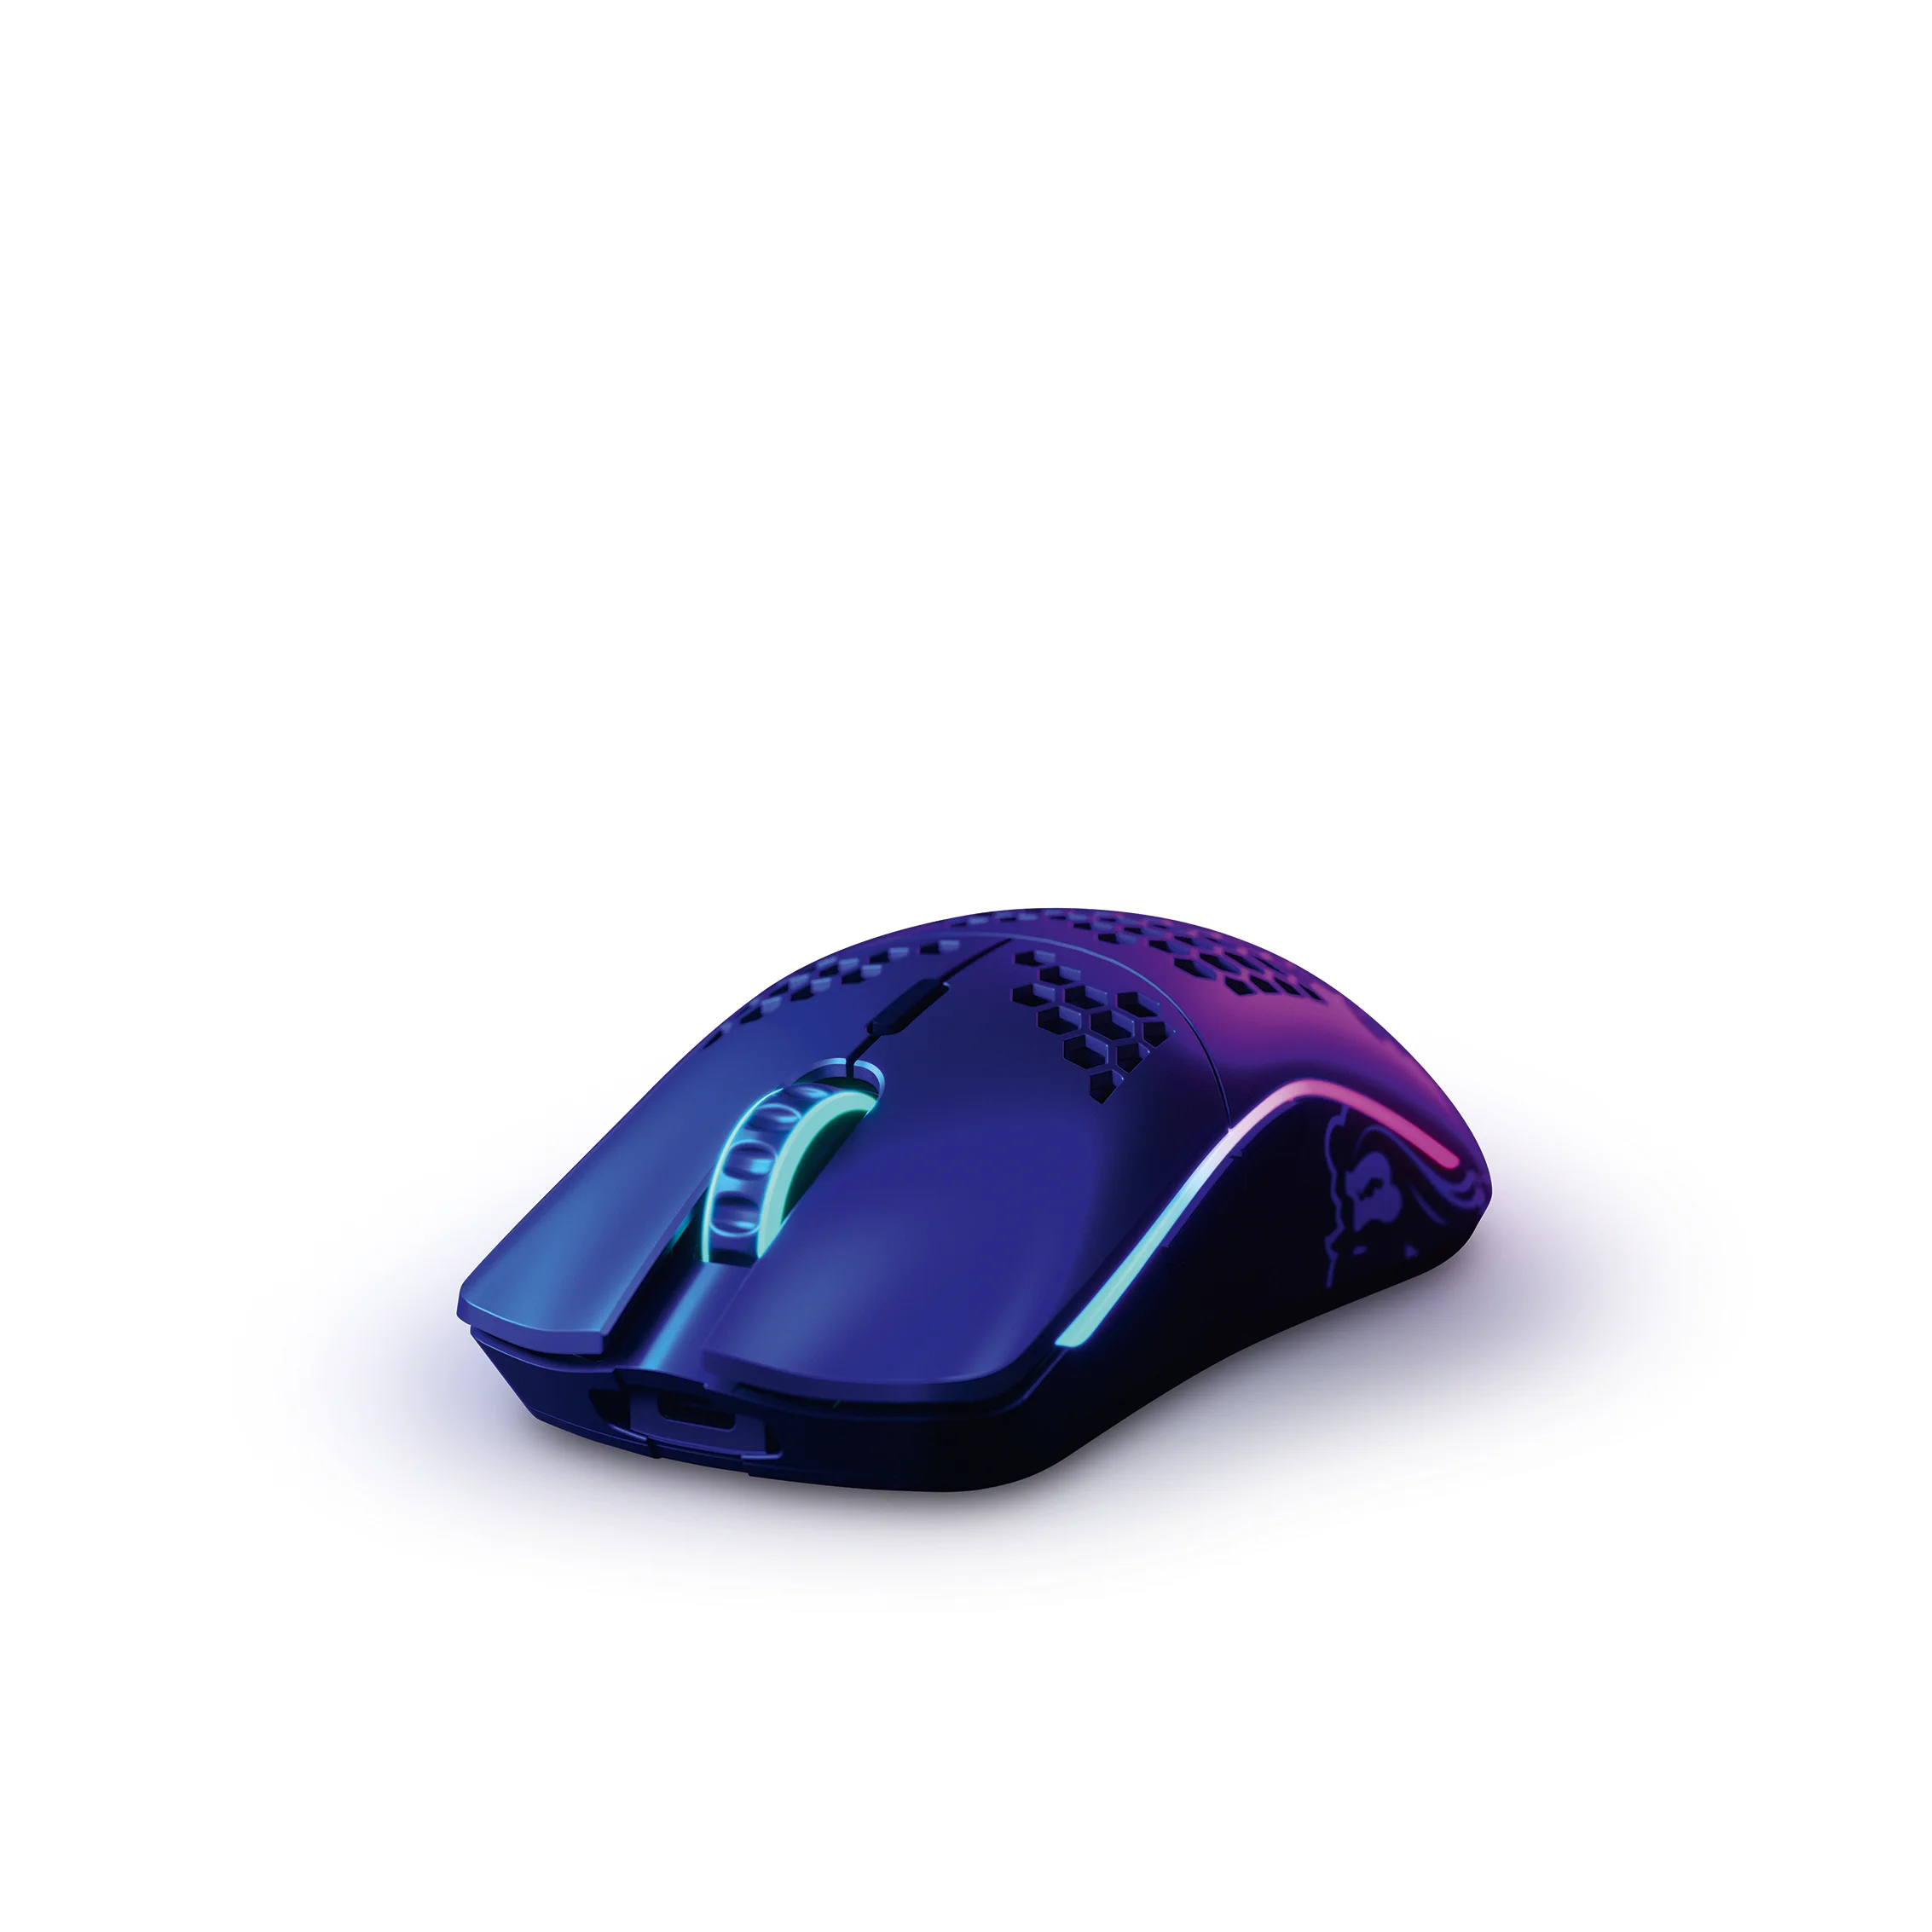 Nordic Powered 2 4ghz Wireless Mouse Supports Very Low Latency Pc Gaming Nordicsemi Com